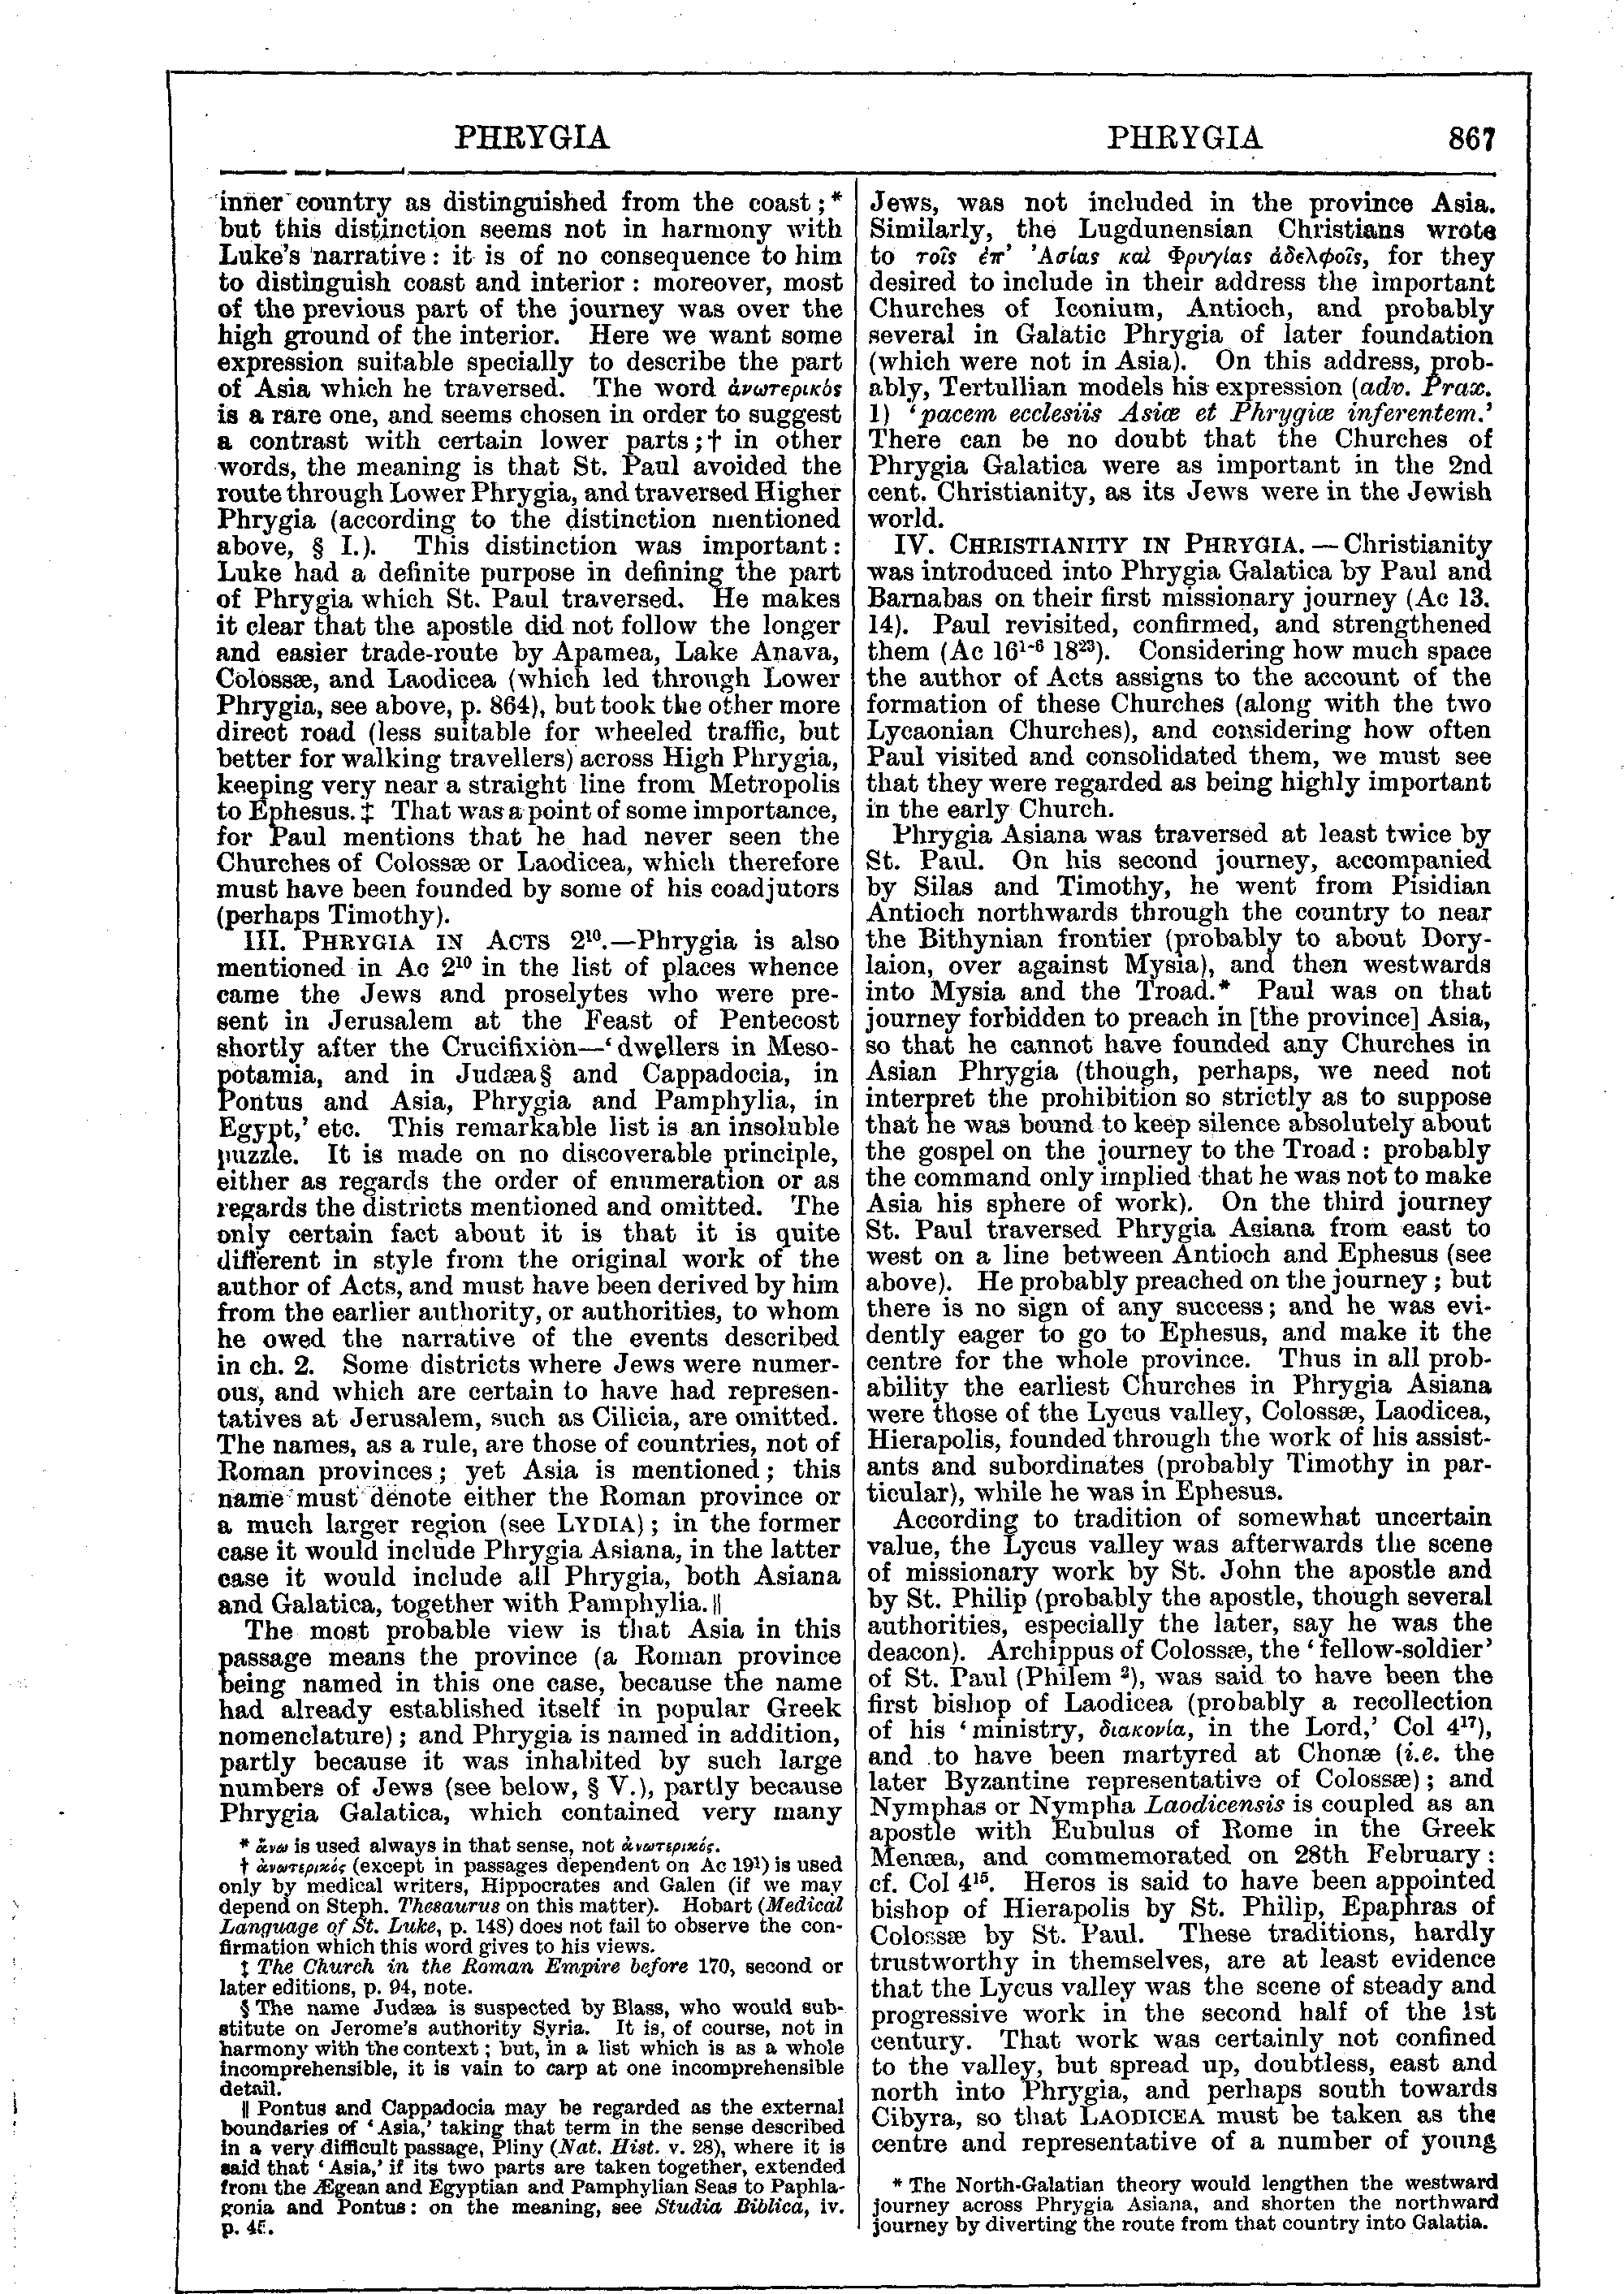 Image of page 867